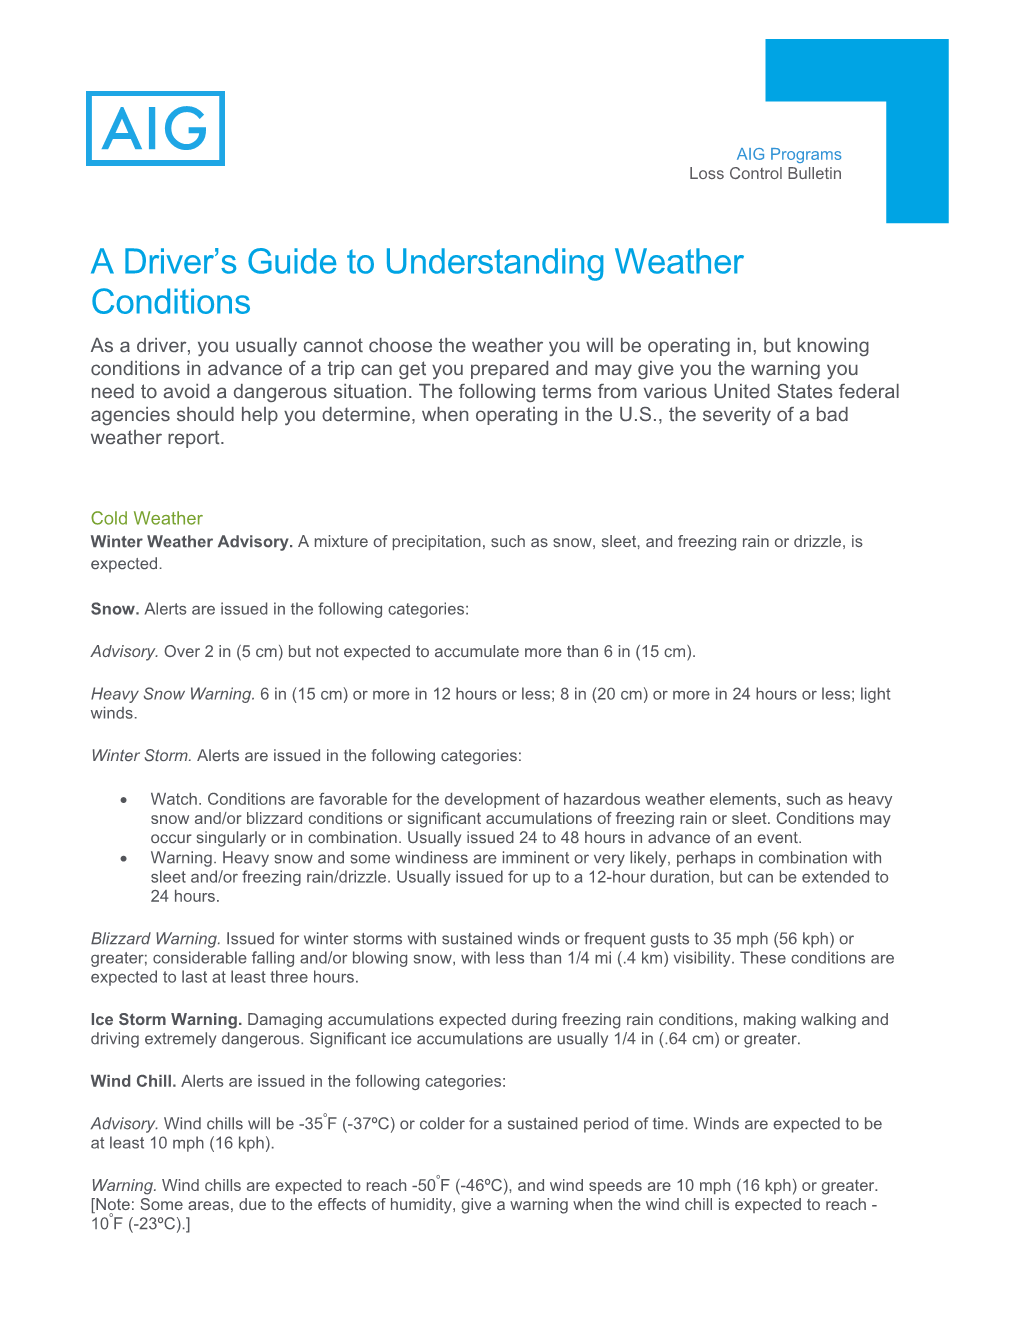 A Driver's Guide to Understanding Weather Conditions